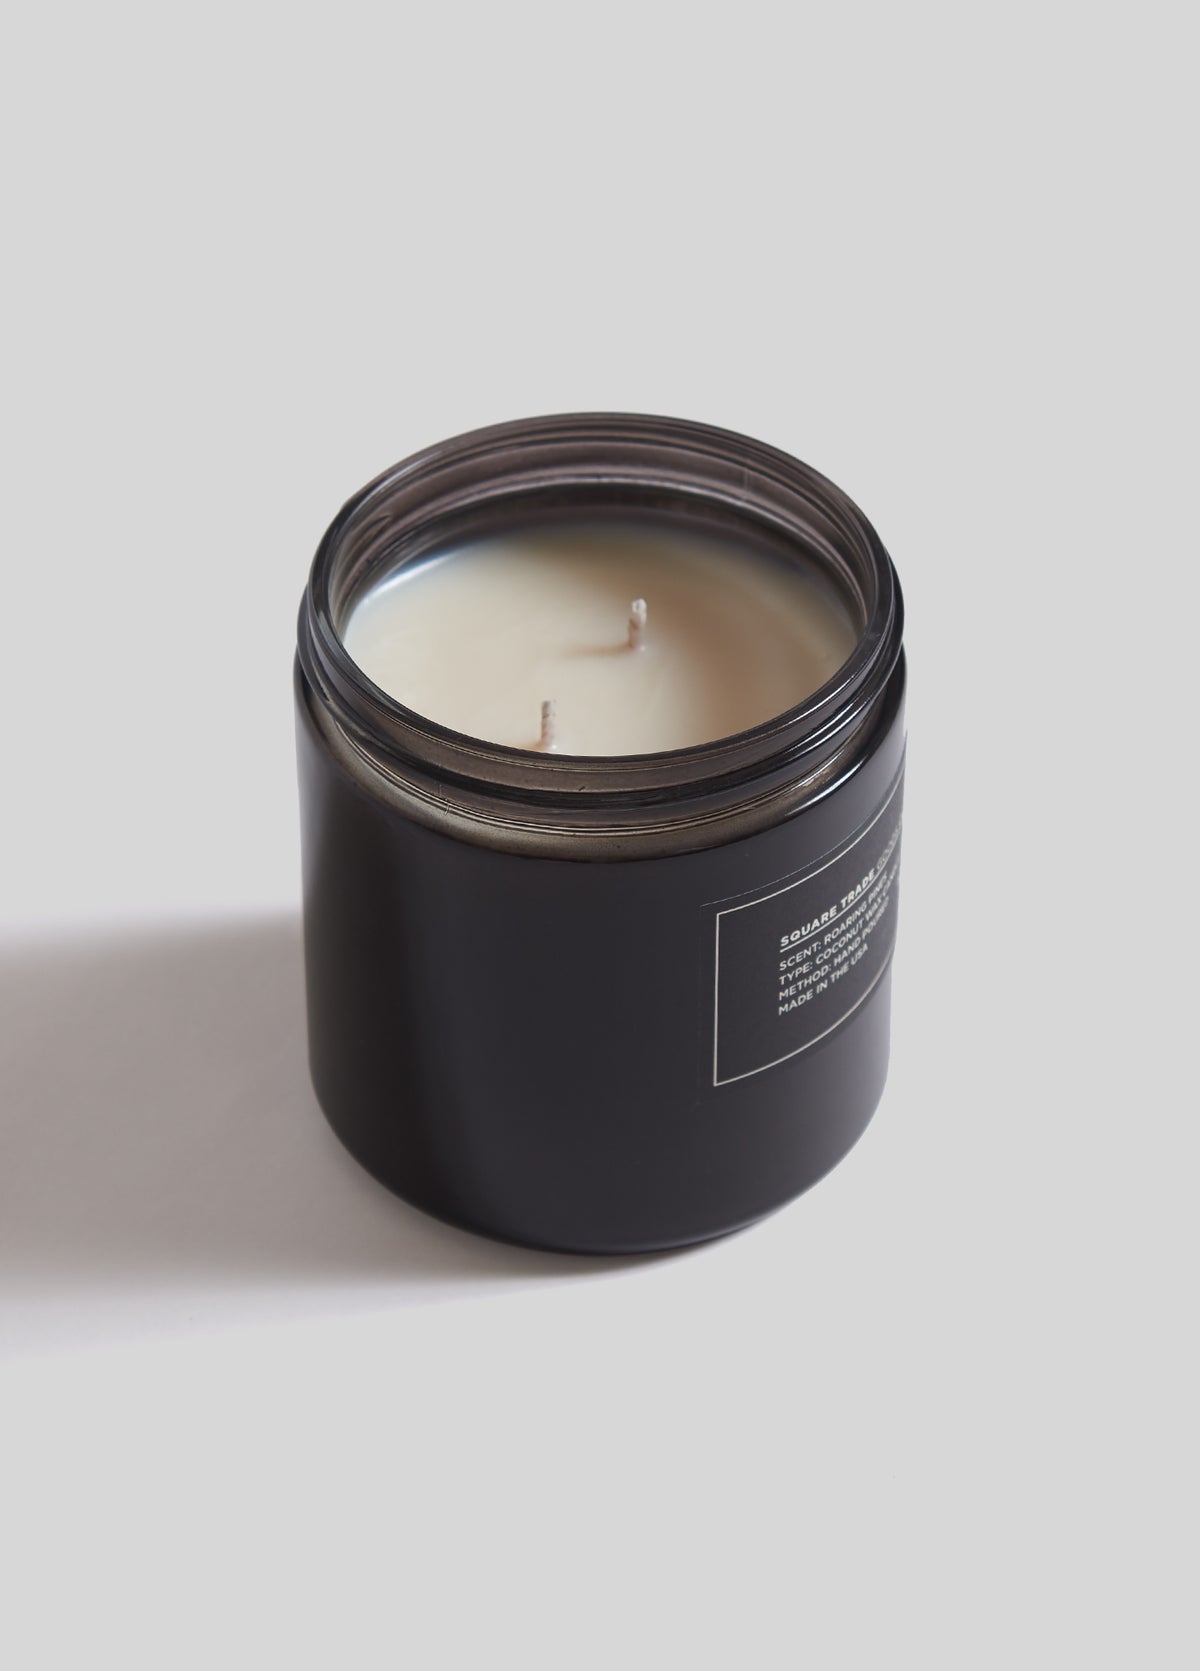 Roaring Pines 16oz. Candle